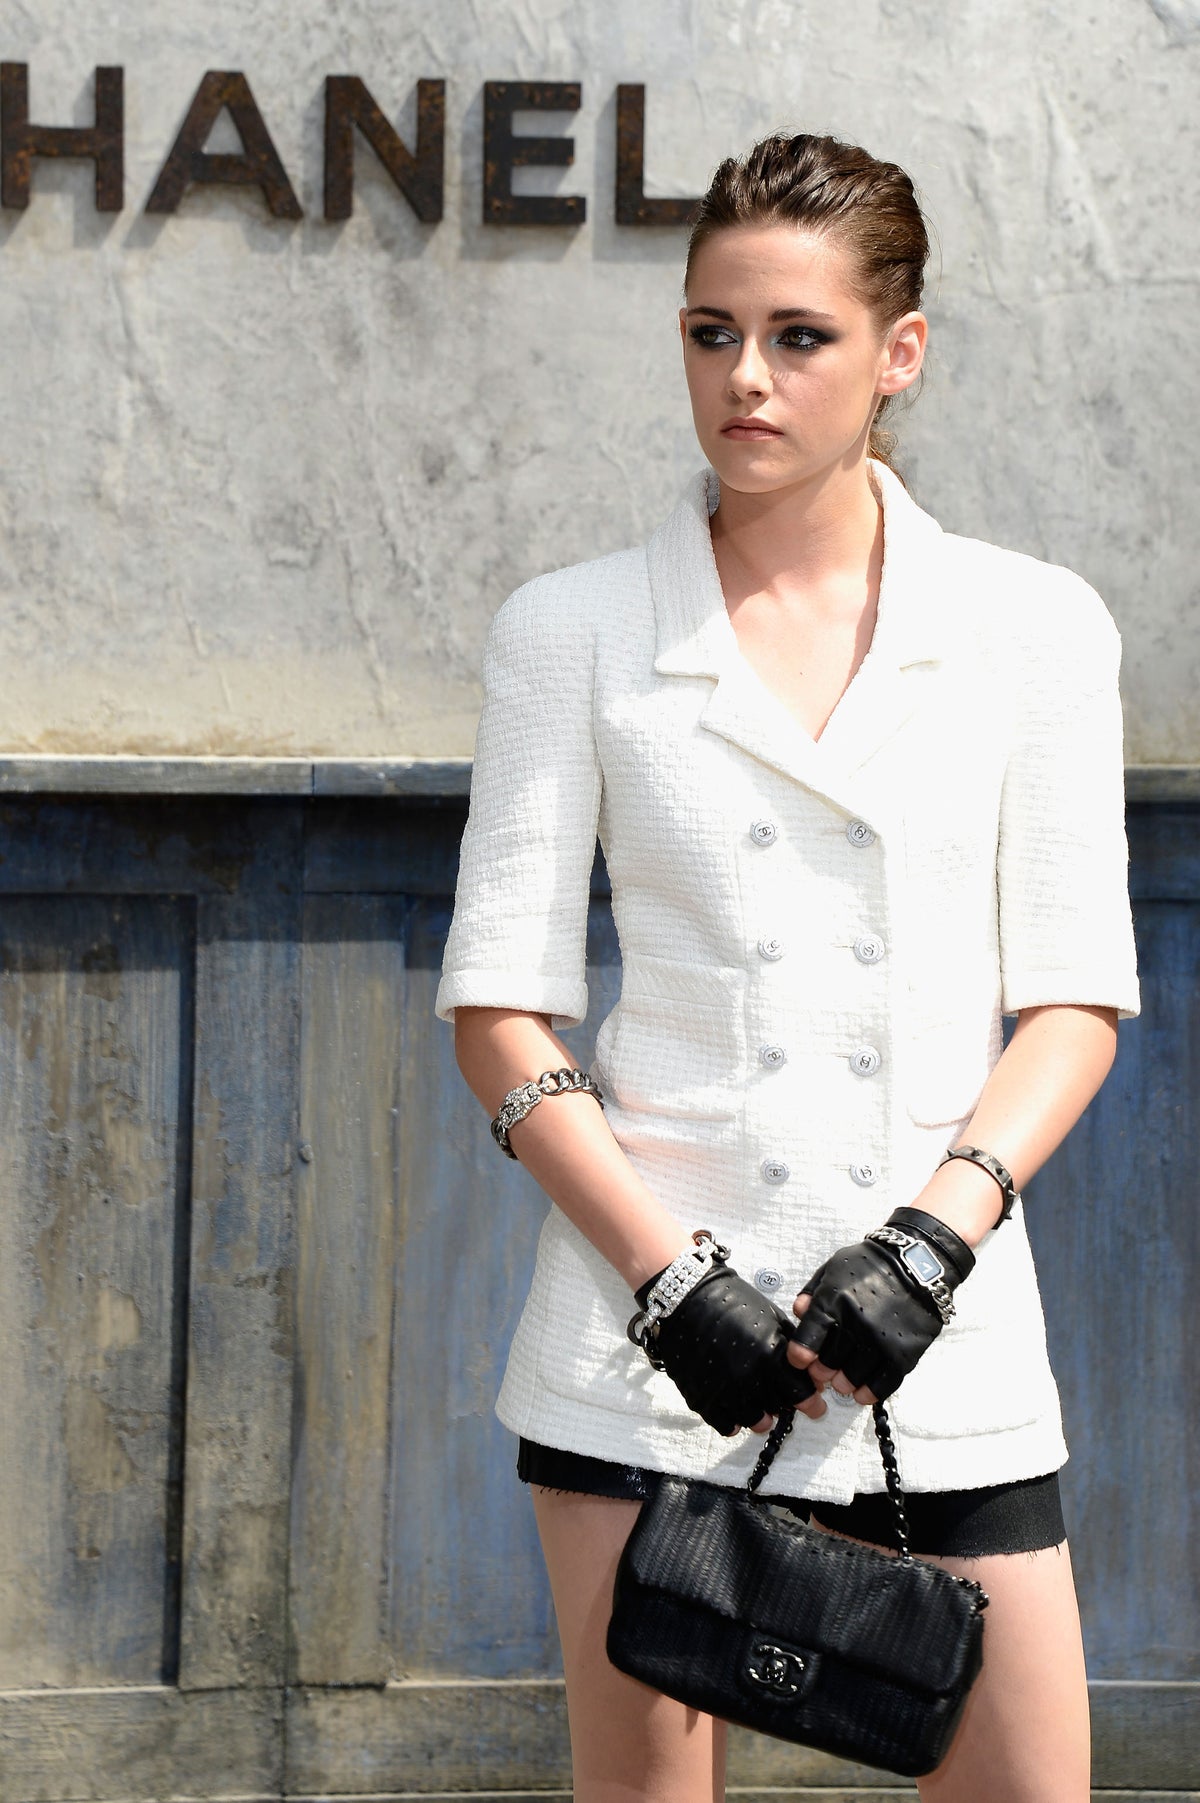 Kristen Stewart named the new face of Chanel, The Independent